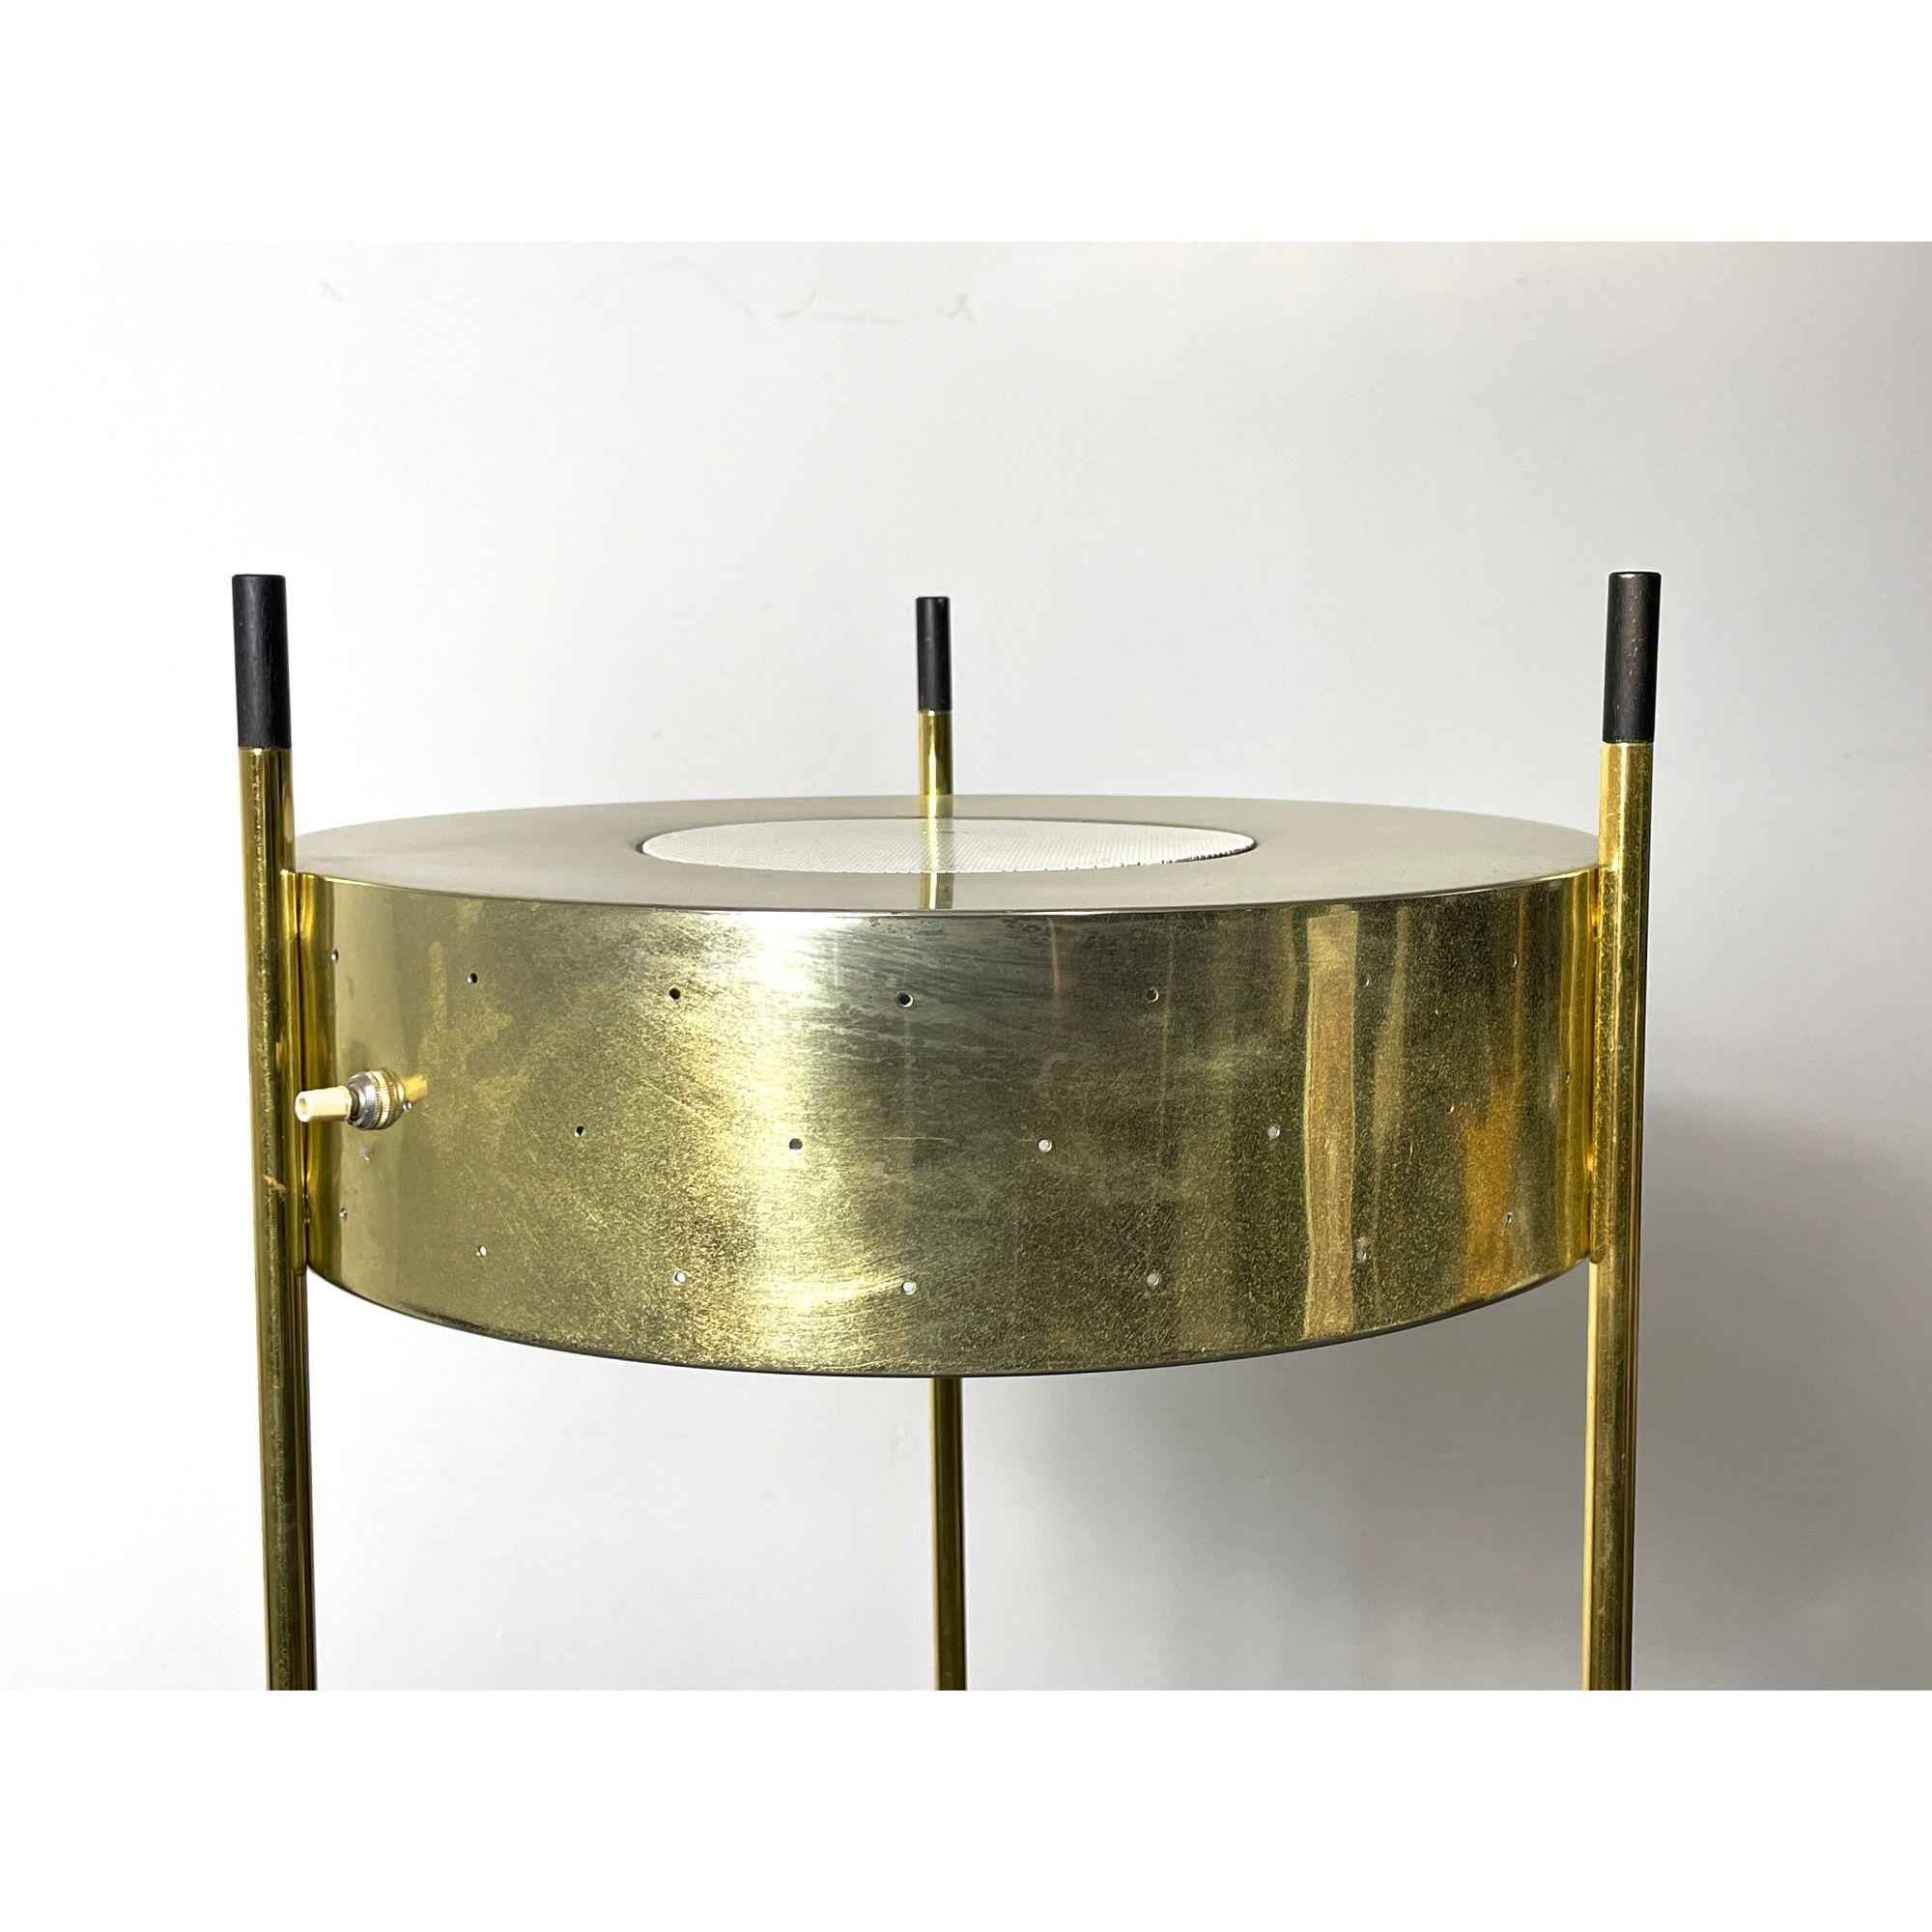 Mid Century Modern Vintage Brass Floor Lamp with Shelves by Laurel, circa 1960s In Good Condition For Sale In Troy, MI